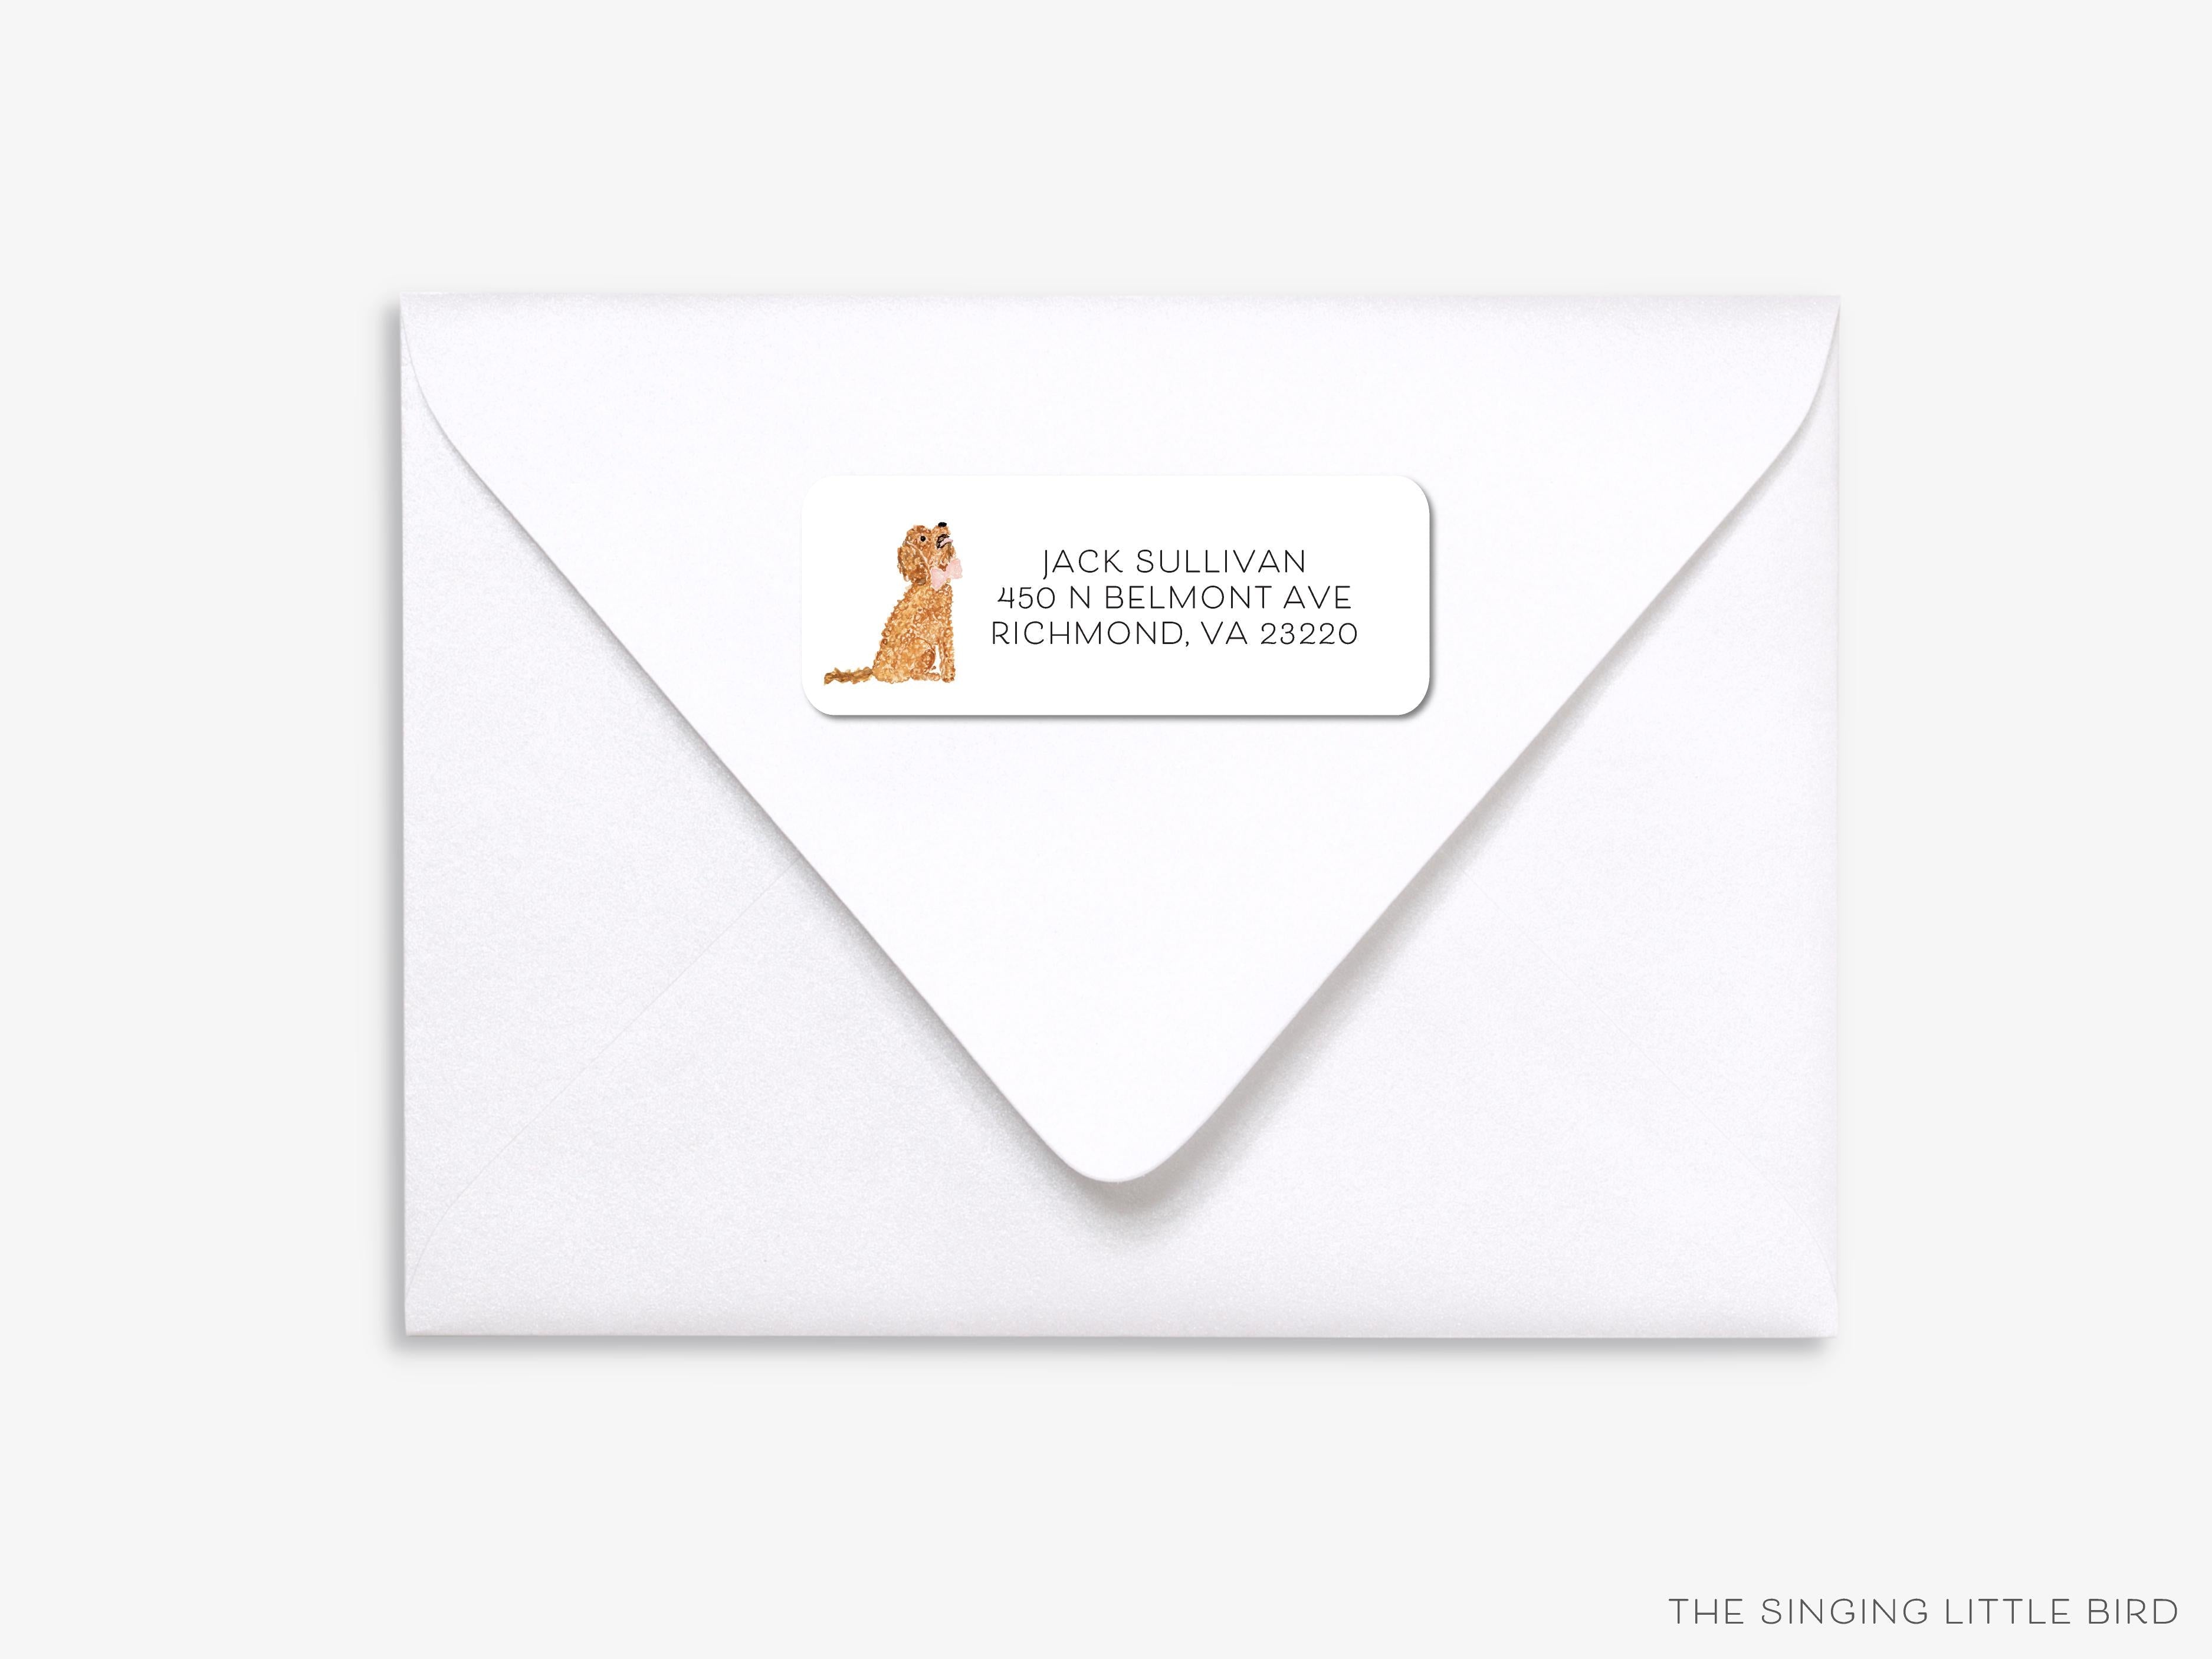 Goldendoodle Return Address Labels-These personalized return address labels are 2.625" x 1" and feature our hand-painted watercolor goldendoodle, printed in the USA on beautiful matte finish labels. These make great gifts for yourself or the animal lover.-The Singing Little Bird